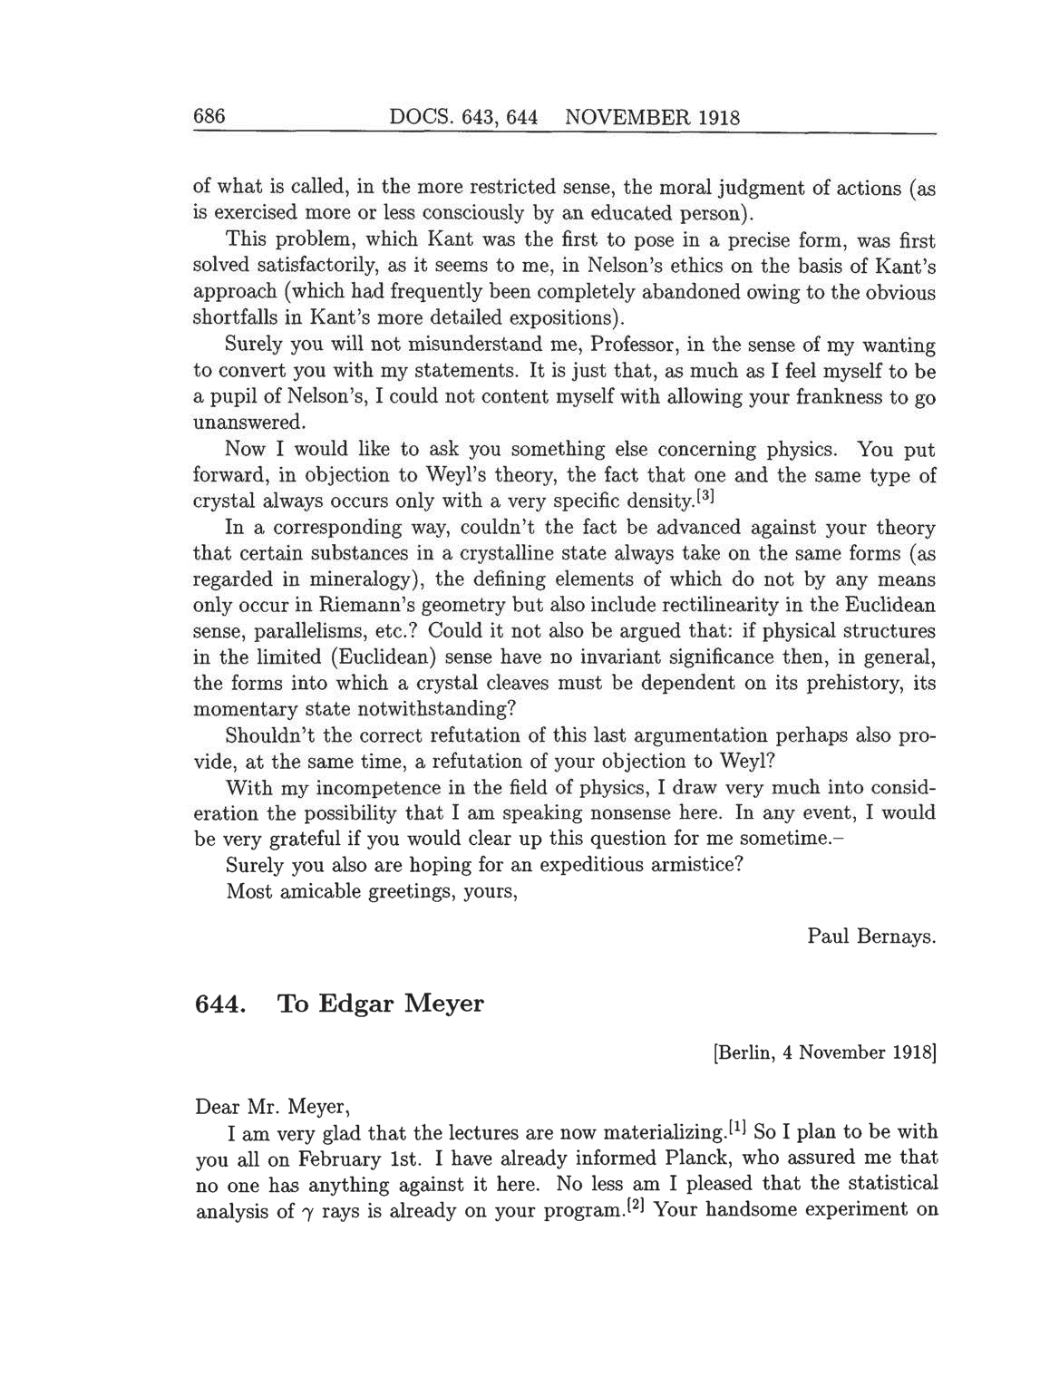 Volume 8: The Berlin Years: Correspondence, 1914-1918 (English translation supplement) page 686